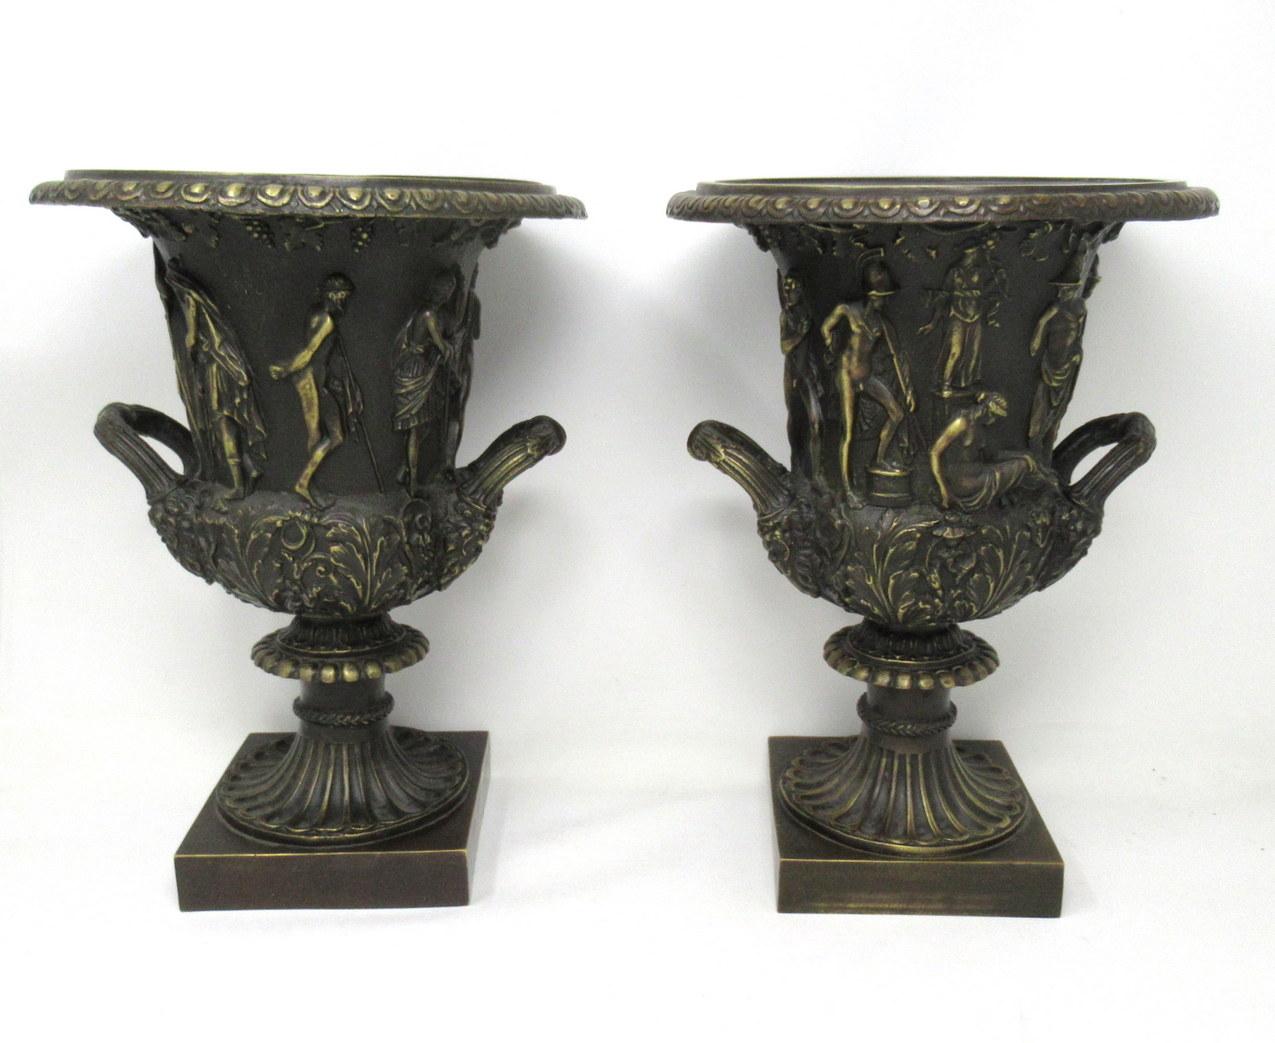 Impressive pair of Grand Tour style twin handle patinated bronze Campagne urns, of generous and heavy proportions. 19th century style made circa 1950s. 

These Urns are in the Borghese or Medici style model with classical relief decoration, egg